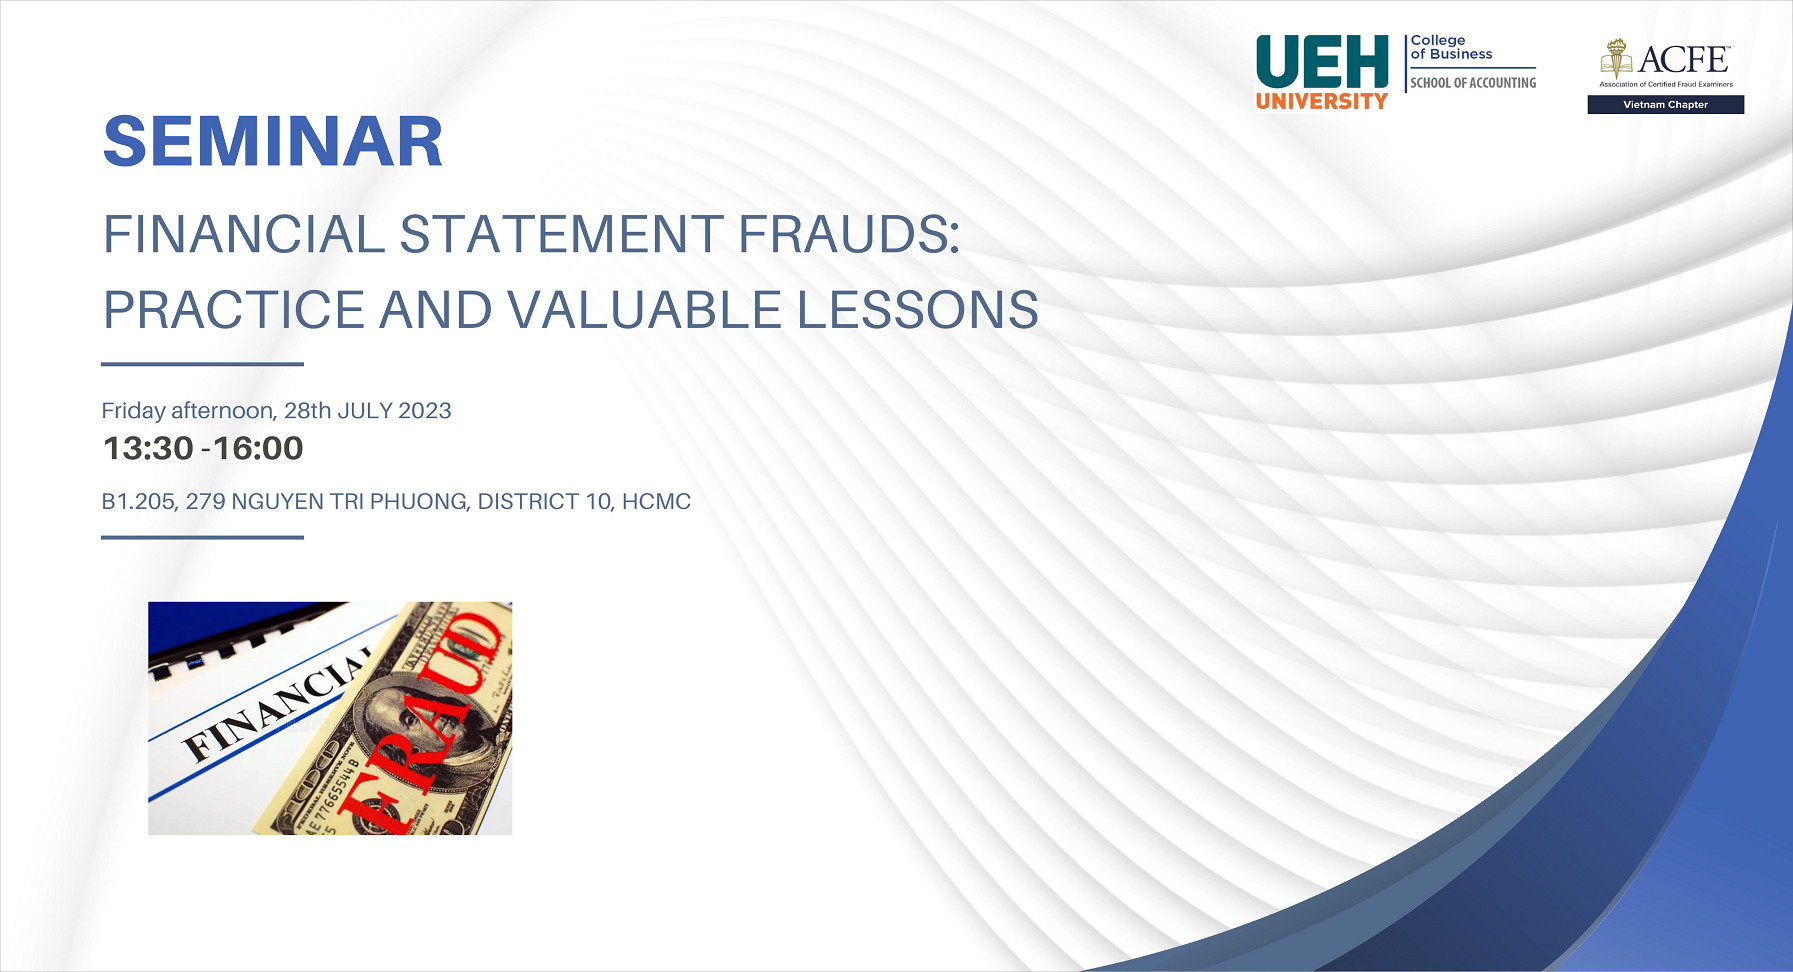 Seminar: Financial Statement frauds: Practice and valuable lessons